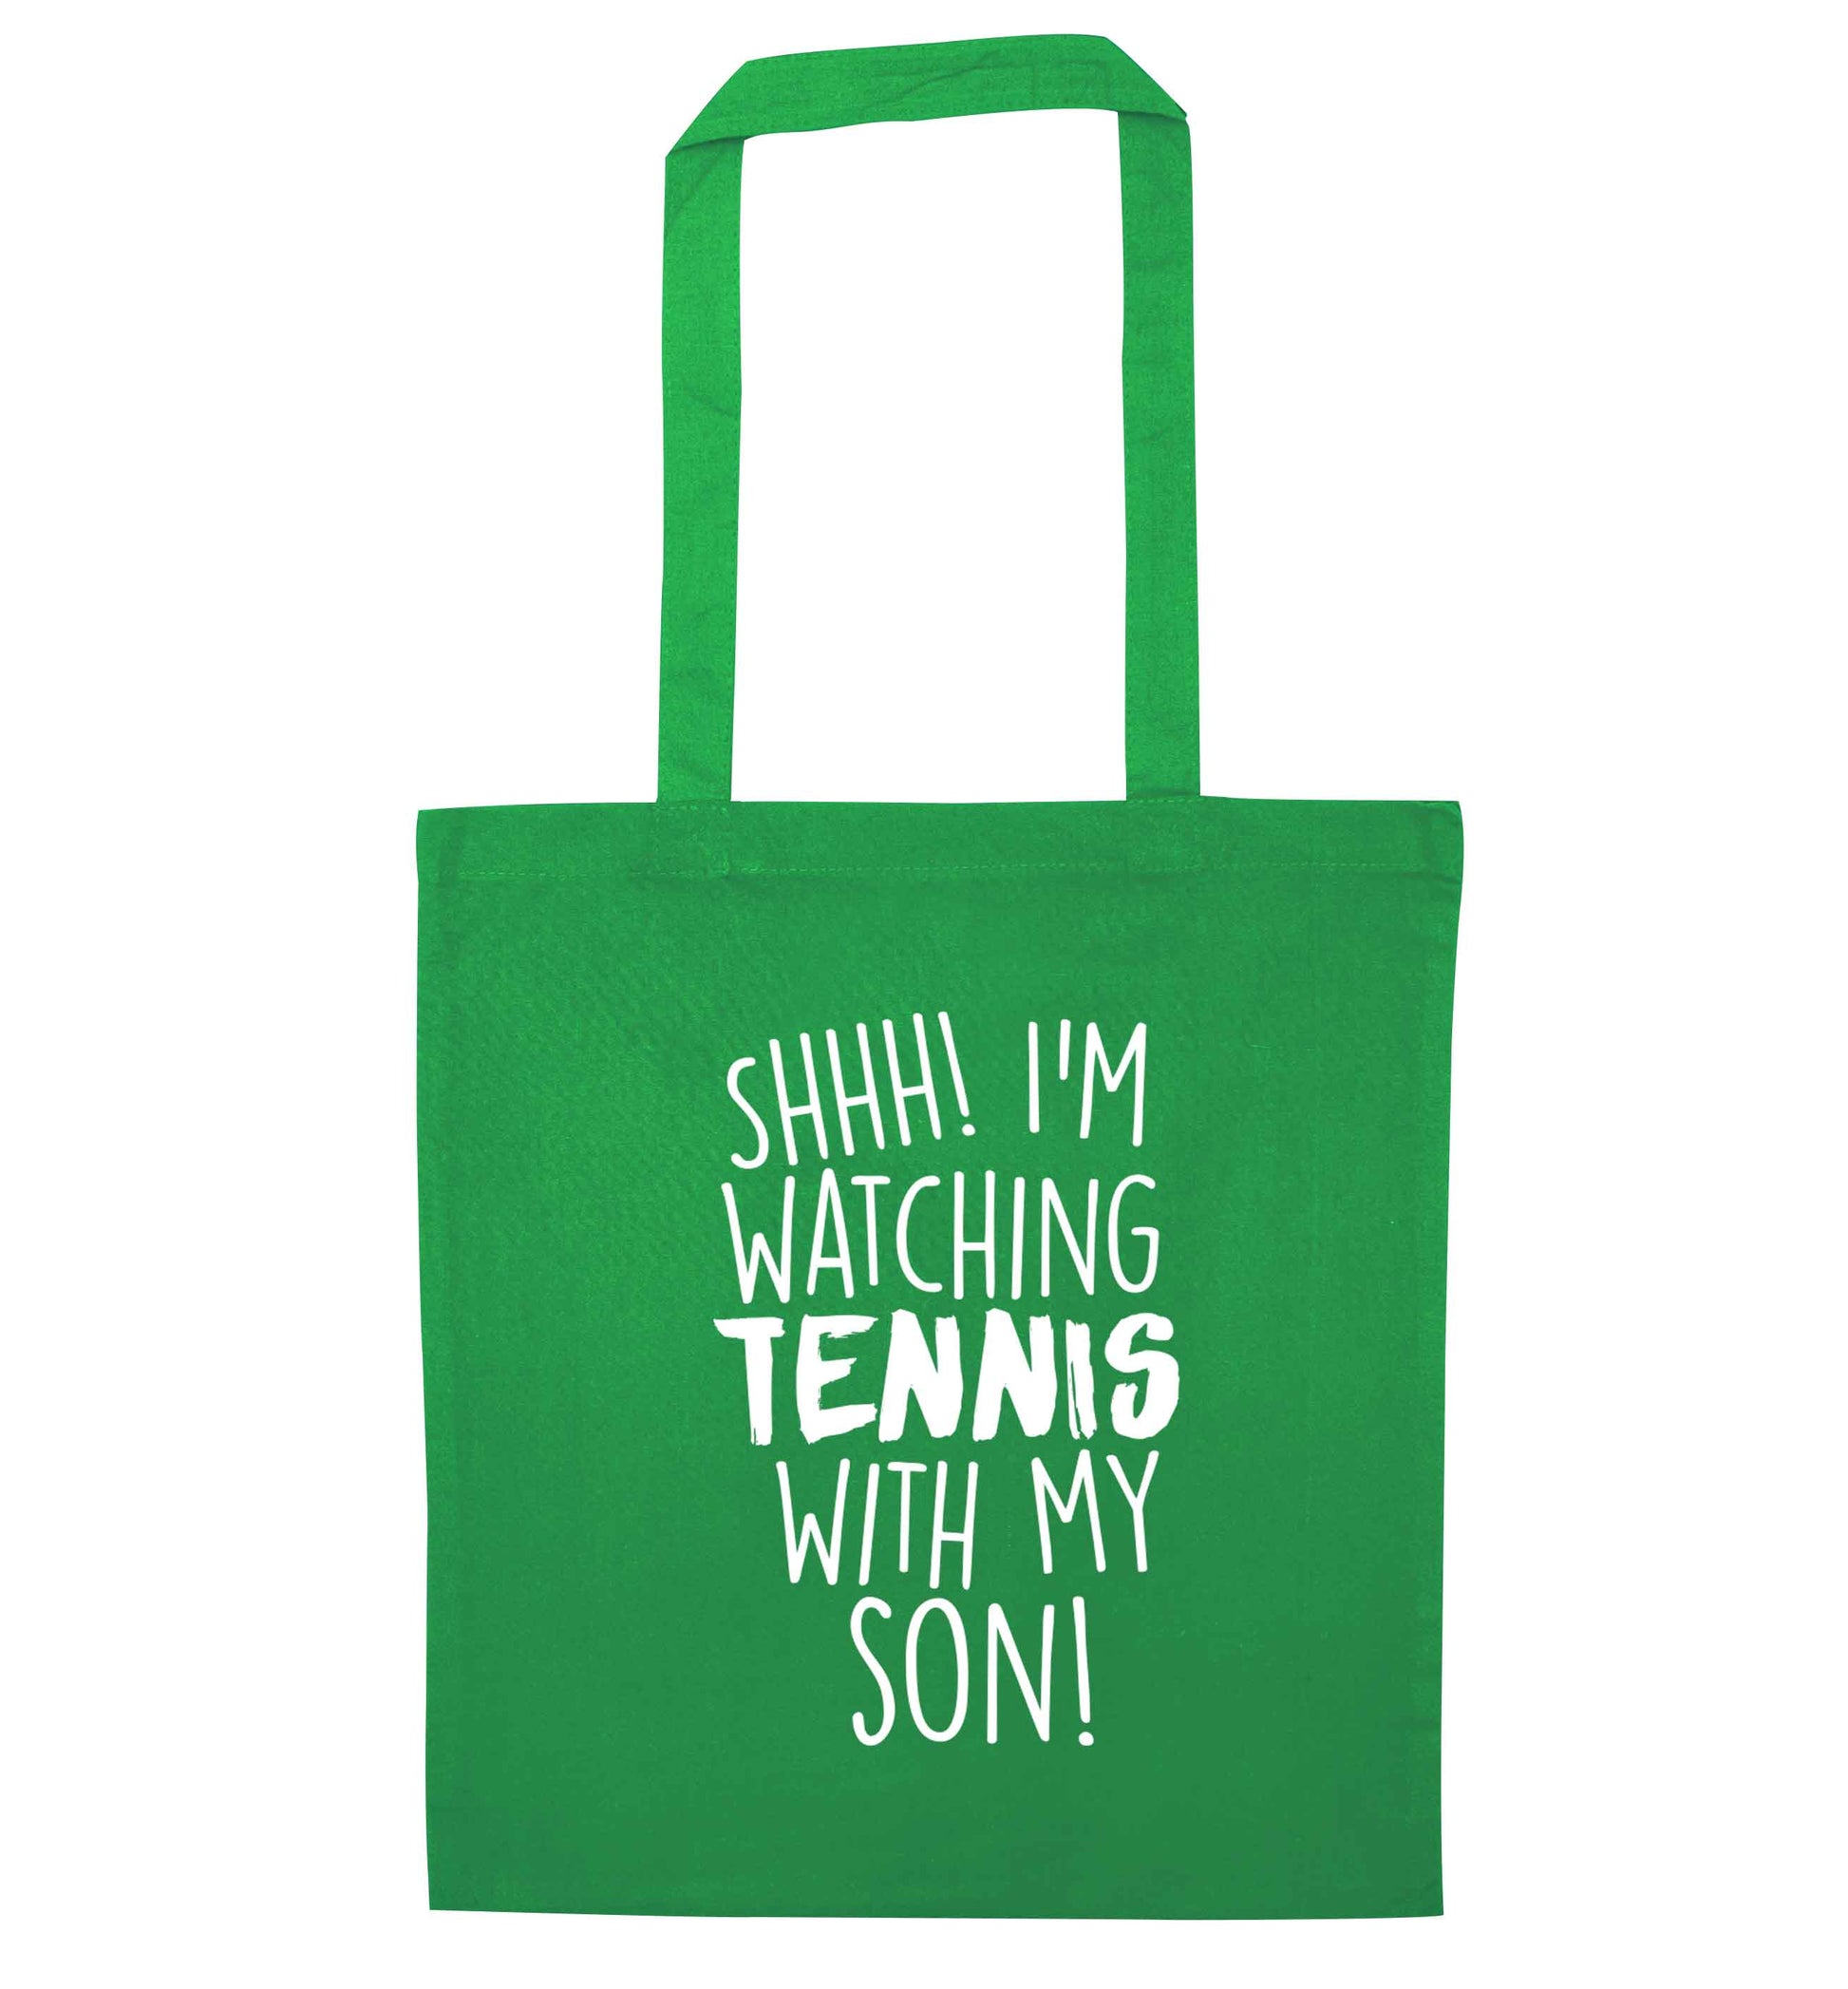 Shh! I'm watching tennis with my son! green tote bag